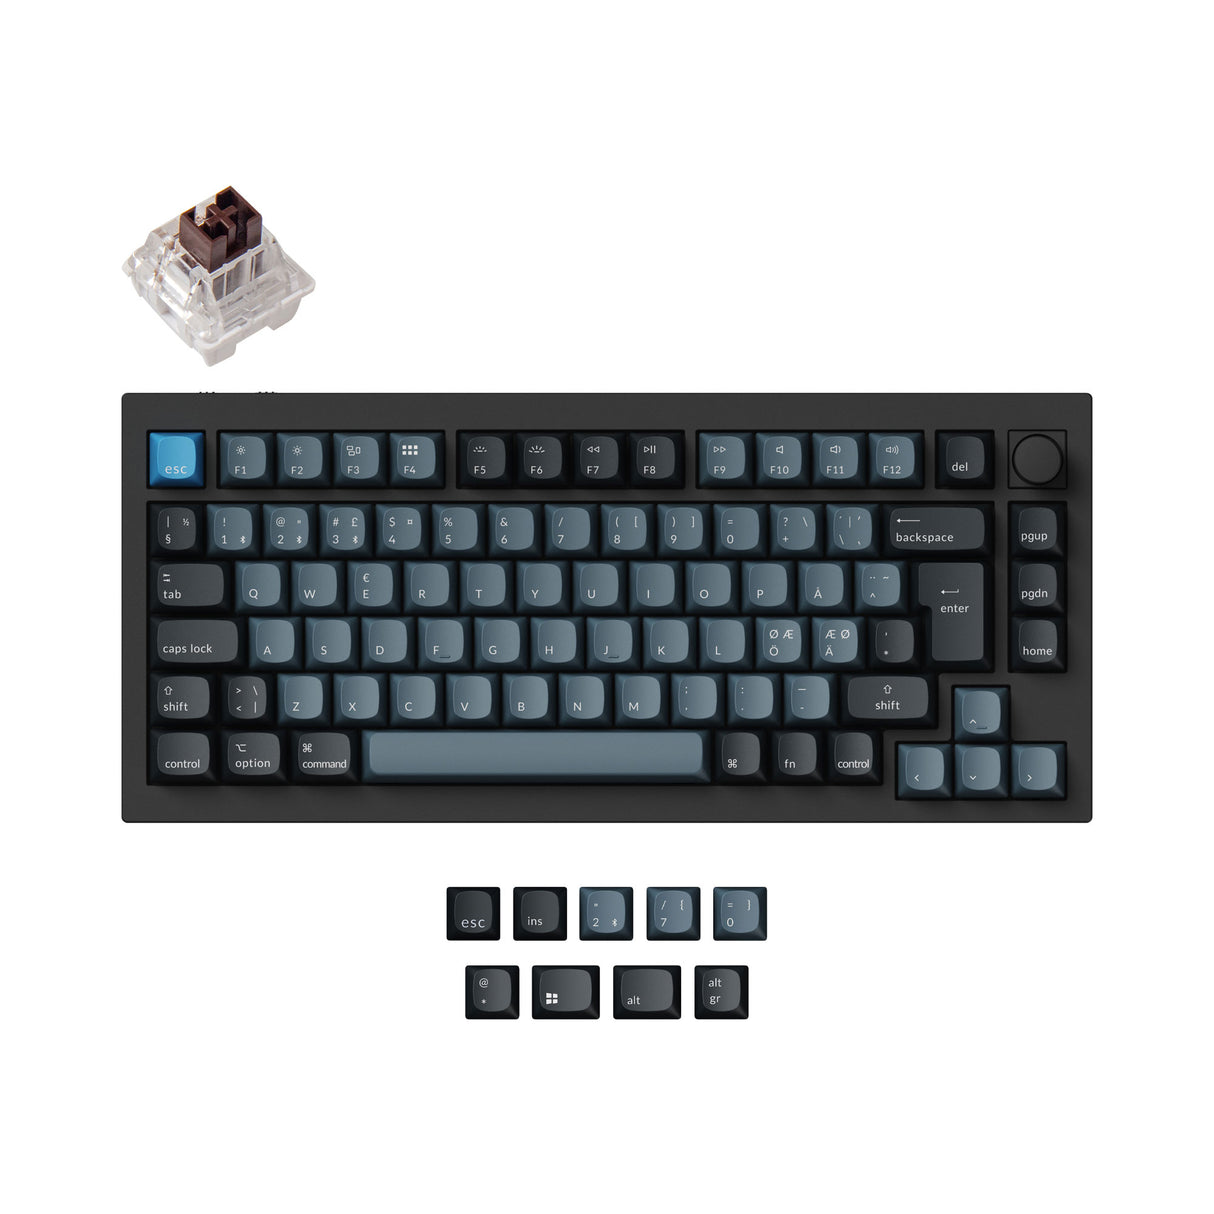 Keychron Q1 Pro QMK/VIA wireless custom mechanical keyboard 75 percent layout aluminum black for Mac WIndows Linux RGB backlight hot-swappable K Pro switch Brown ISO Nordic layout